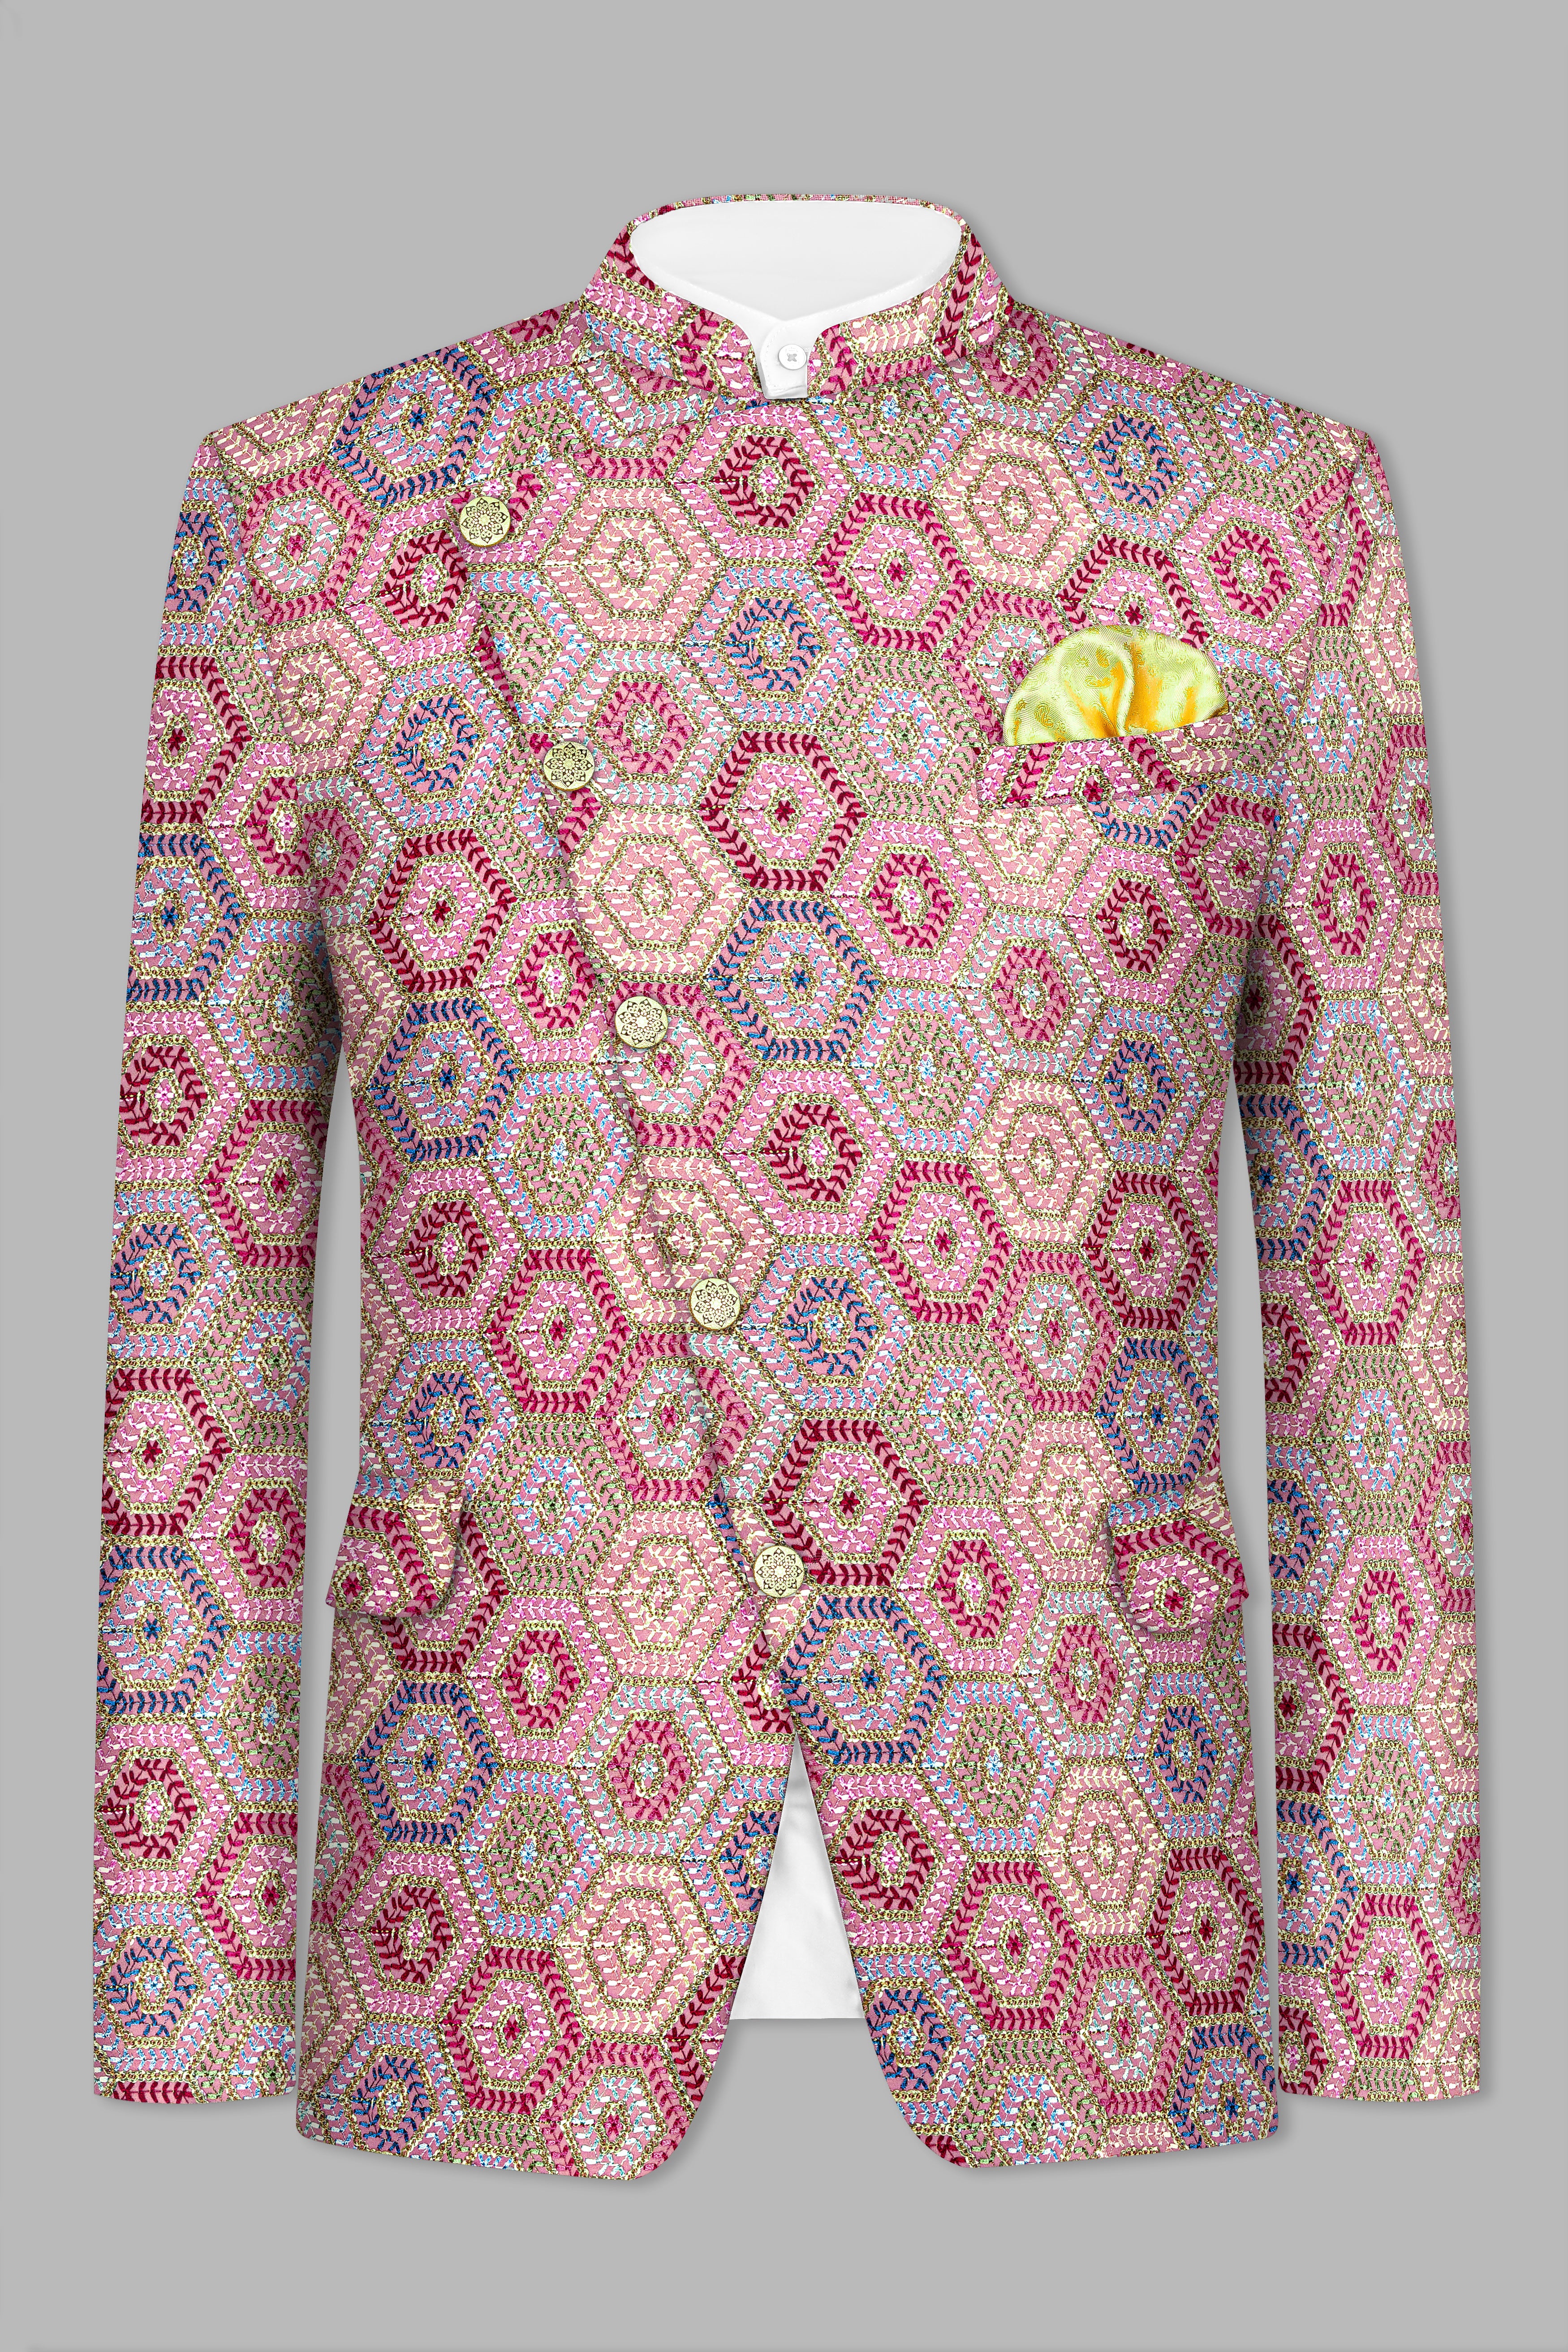 Radical Pink and Rhino Blue Multicolour Thread and Sequin Embroidered Cross Buttoned Bandhgala Jodhpuri BL3491-CBG-36, BL3491-CBG-38, BL3491-CBG-40, BL3491-CBG-42, BL3491-CBG-44, BL3491-CBG-46, BL3491-CBG-49, BL3491-CBG-50, BL3491-CBG-52, BL3491-CBG-54, BL3491-CBG-56, BL3491-CBG-58, BL3491-CBG-60